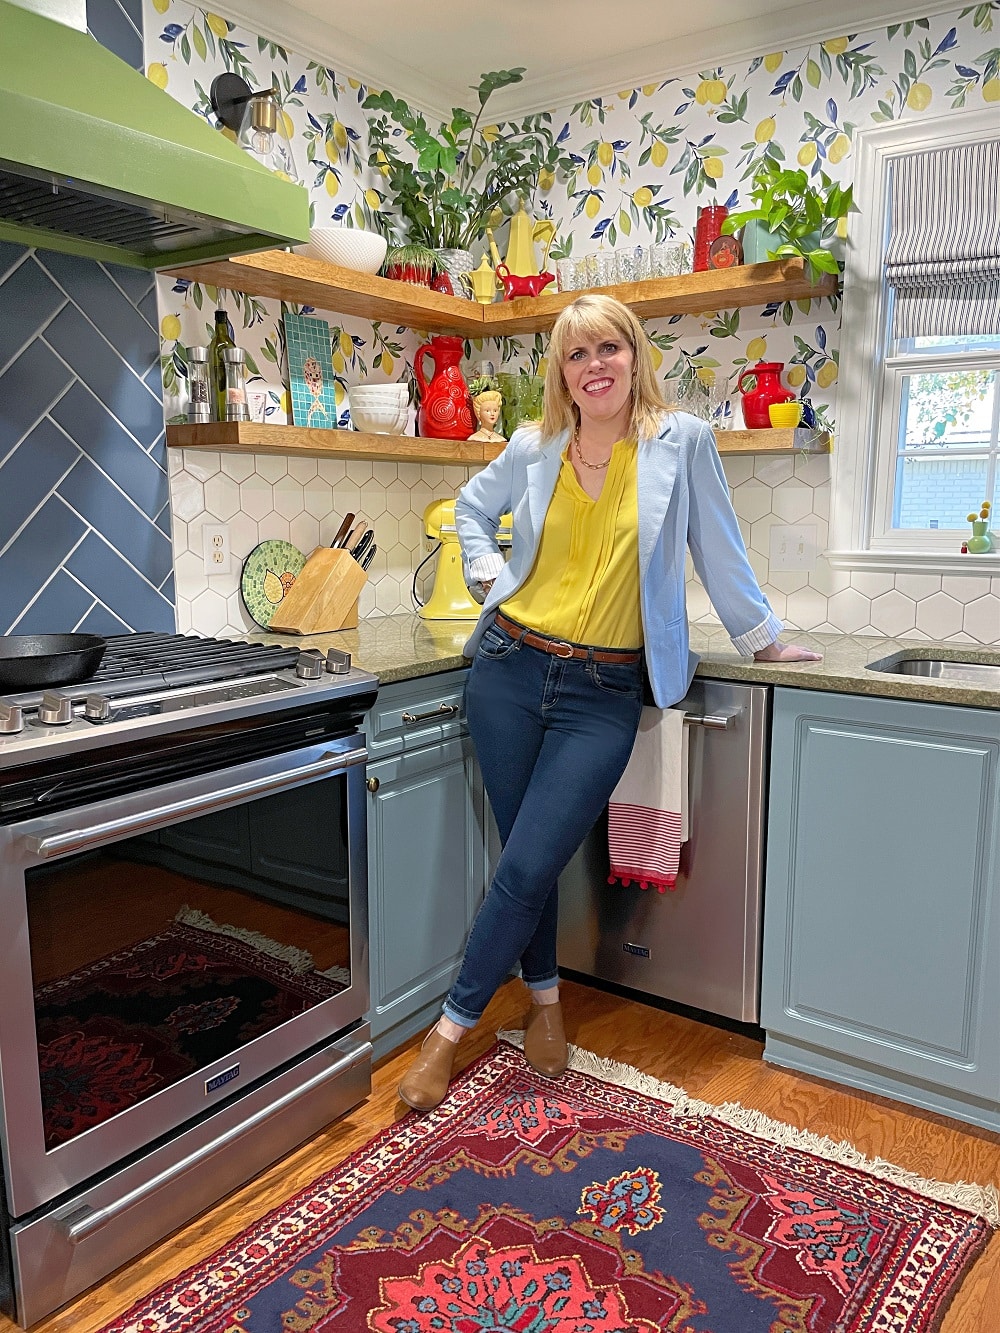 https://maggieoverbystudios.com/wp-content/uploads/2021/11/Maggie-Overby-colorful-kitchen-lemon-wallpaper-yellow-blue-red-accent-reveal-I.jpg